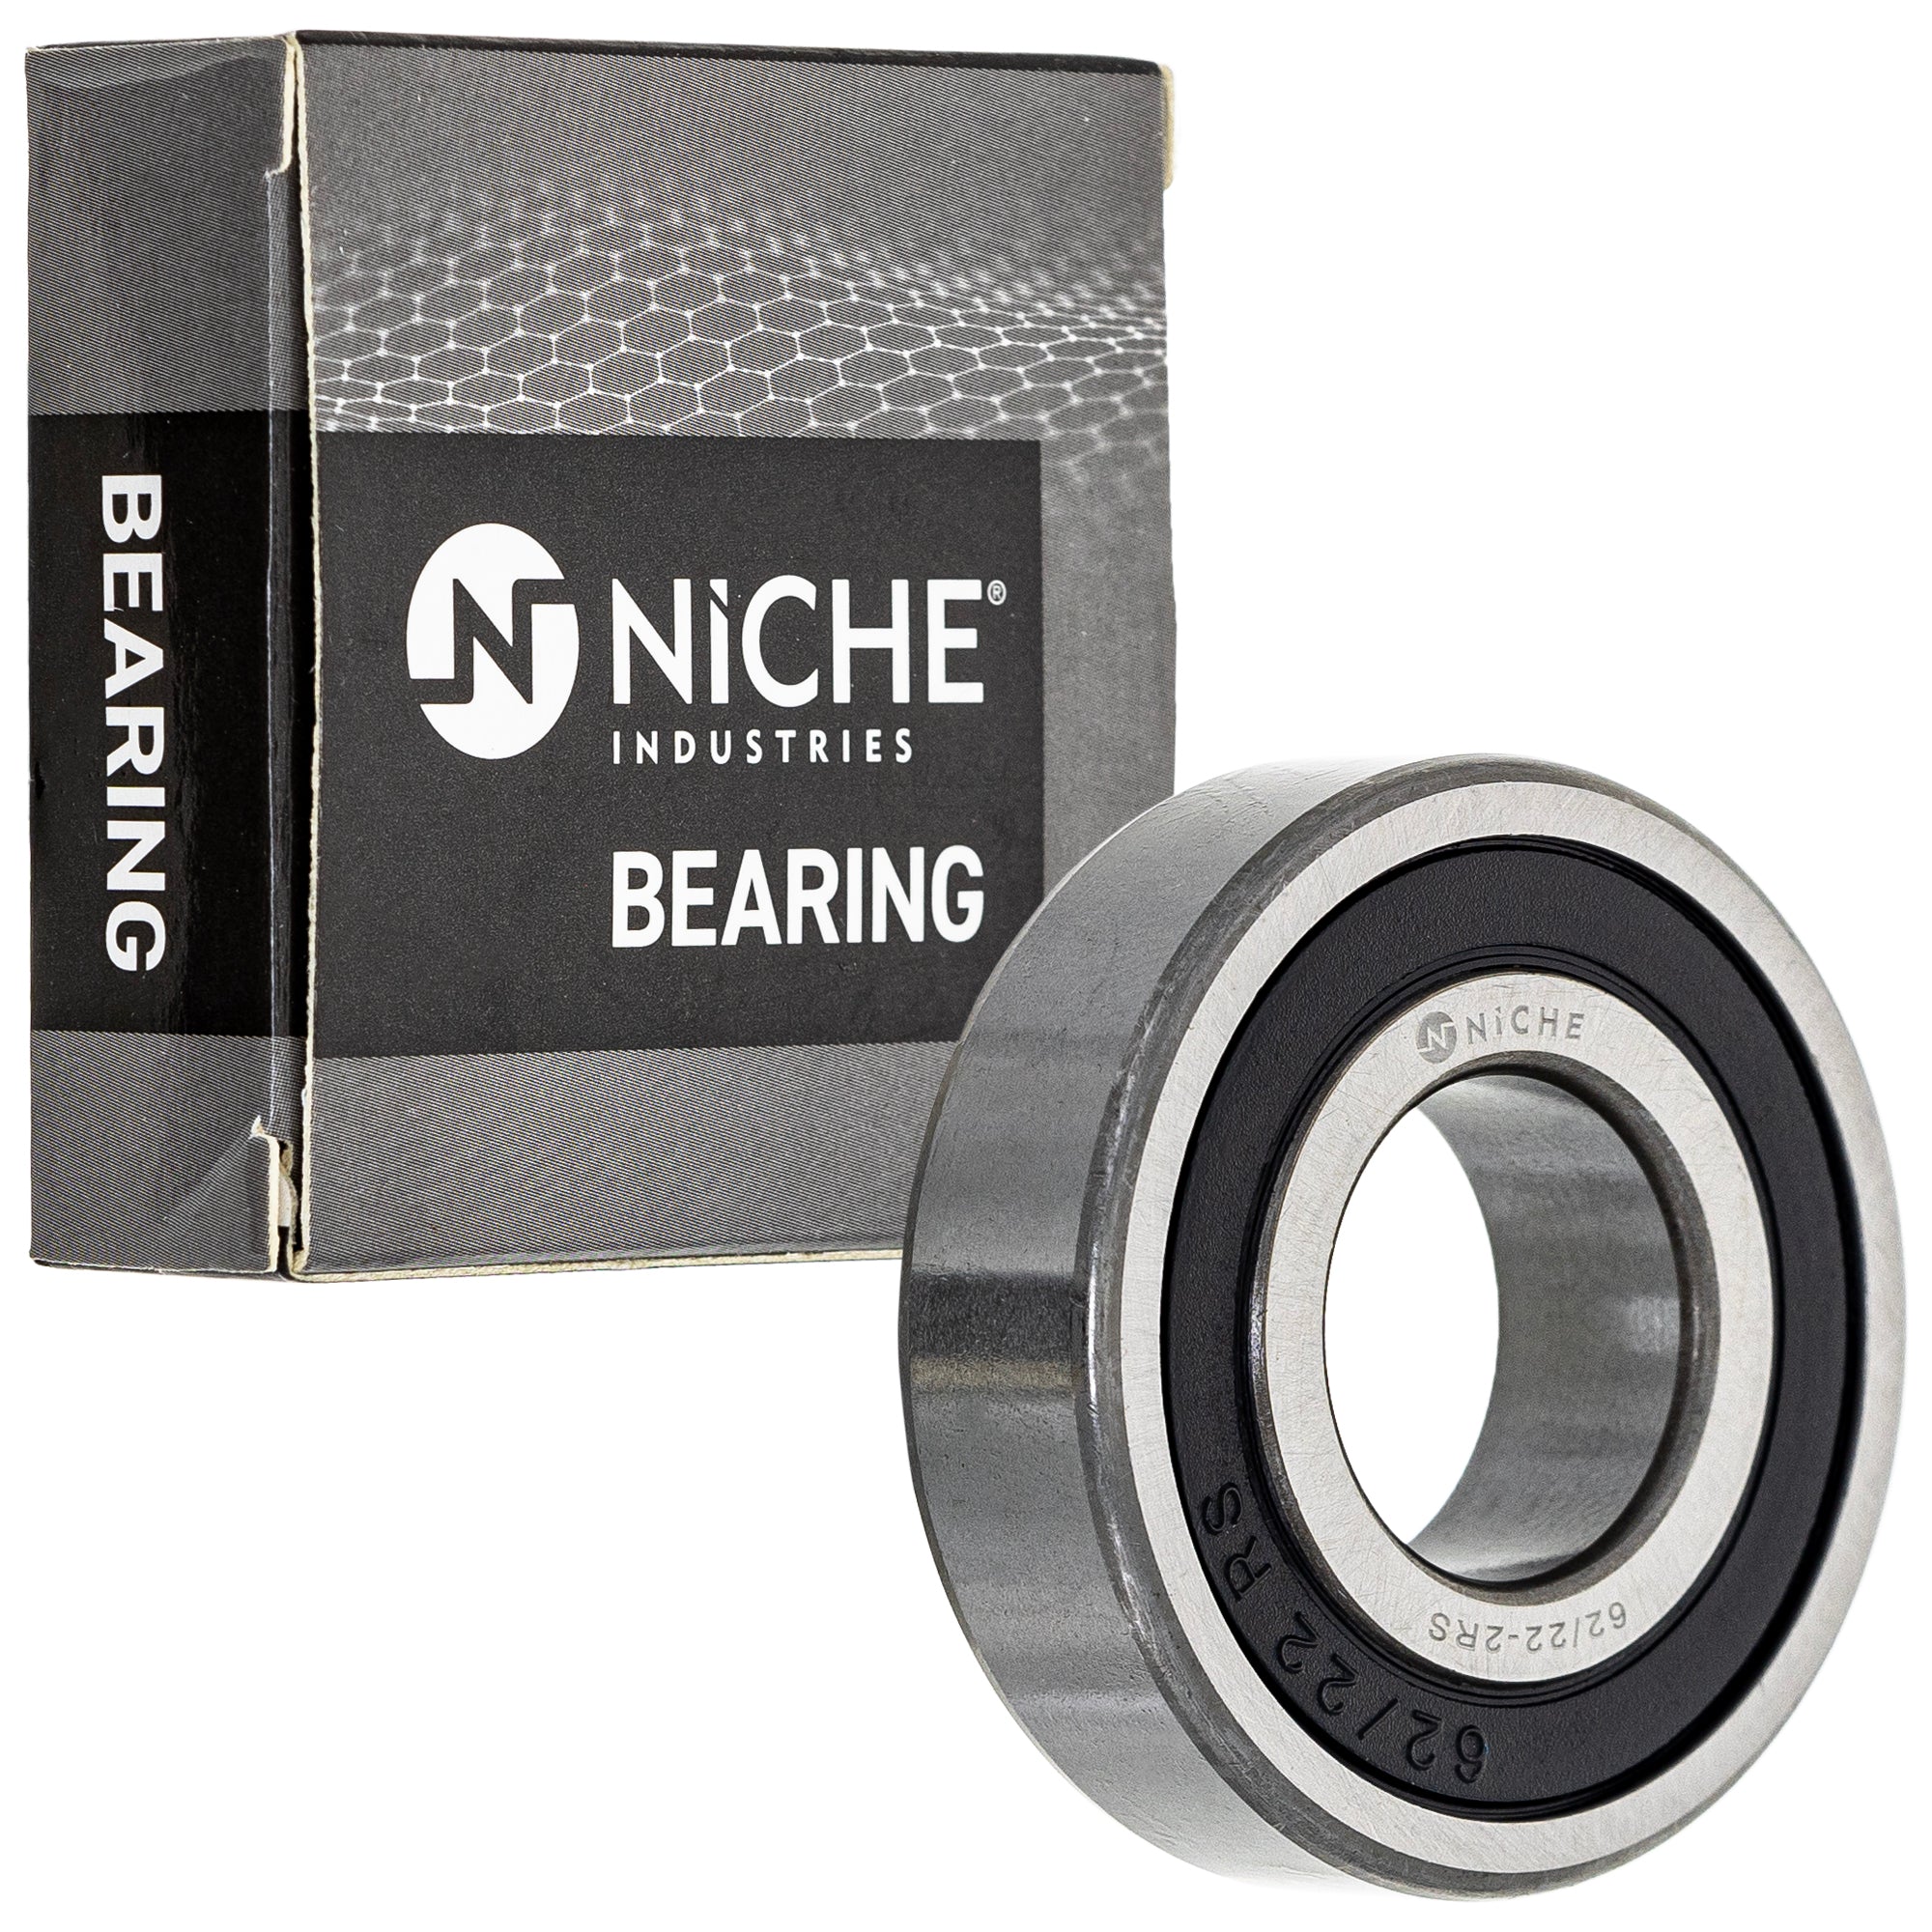 NICHE 519-CBB2271R Bearing 2-Pack for zOTHER Valkyrie Super ST1300